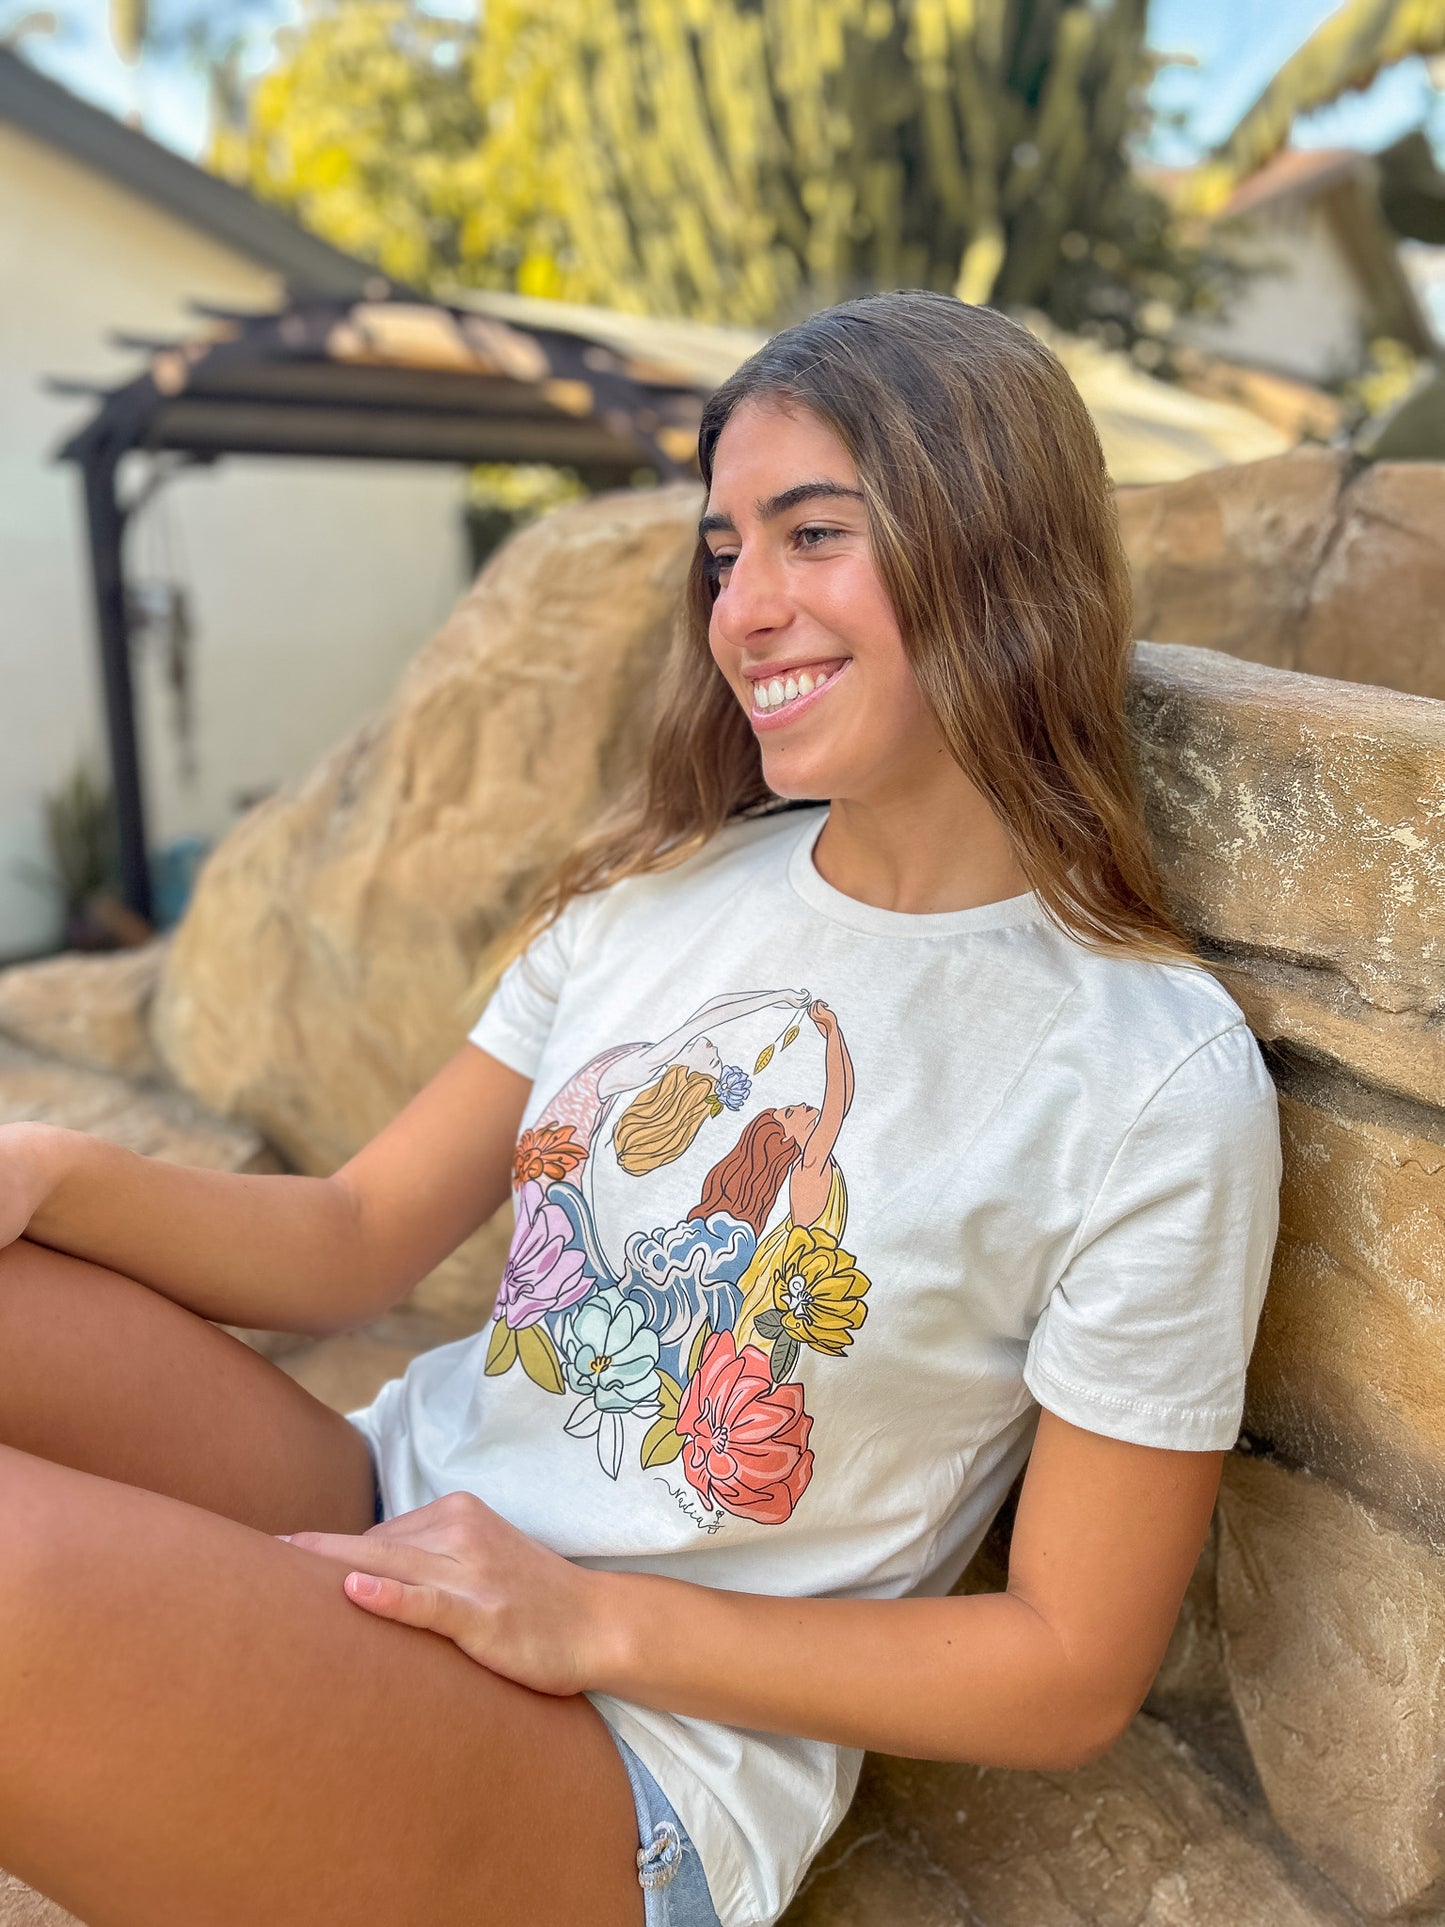 Floral Mermaid Handmade graphic tee for women. North Shore Girls handmade t-shirt collection for the beach lifestyle.